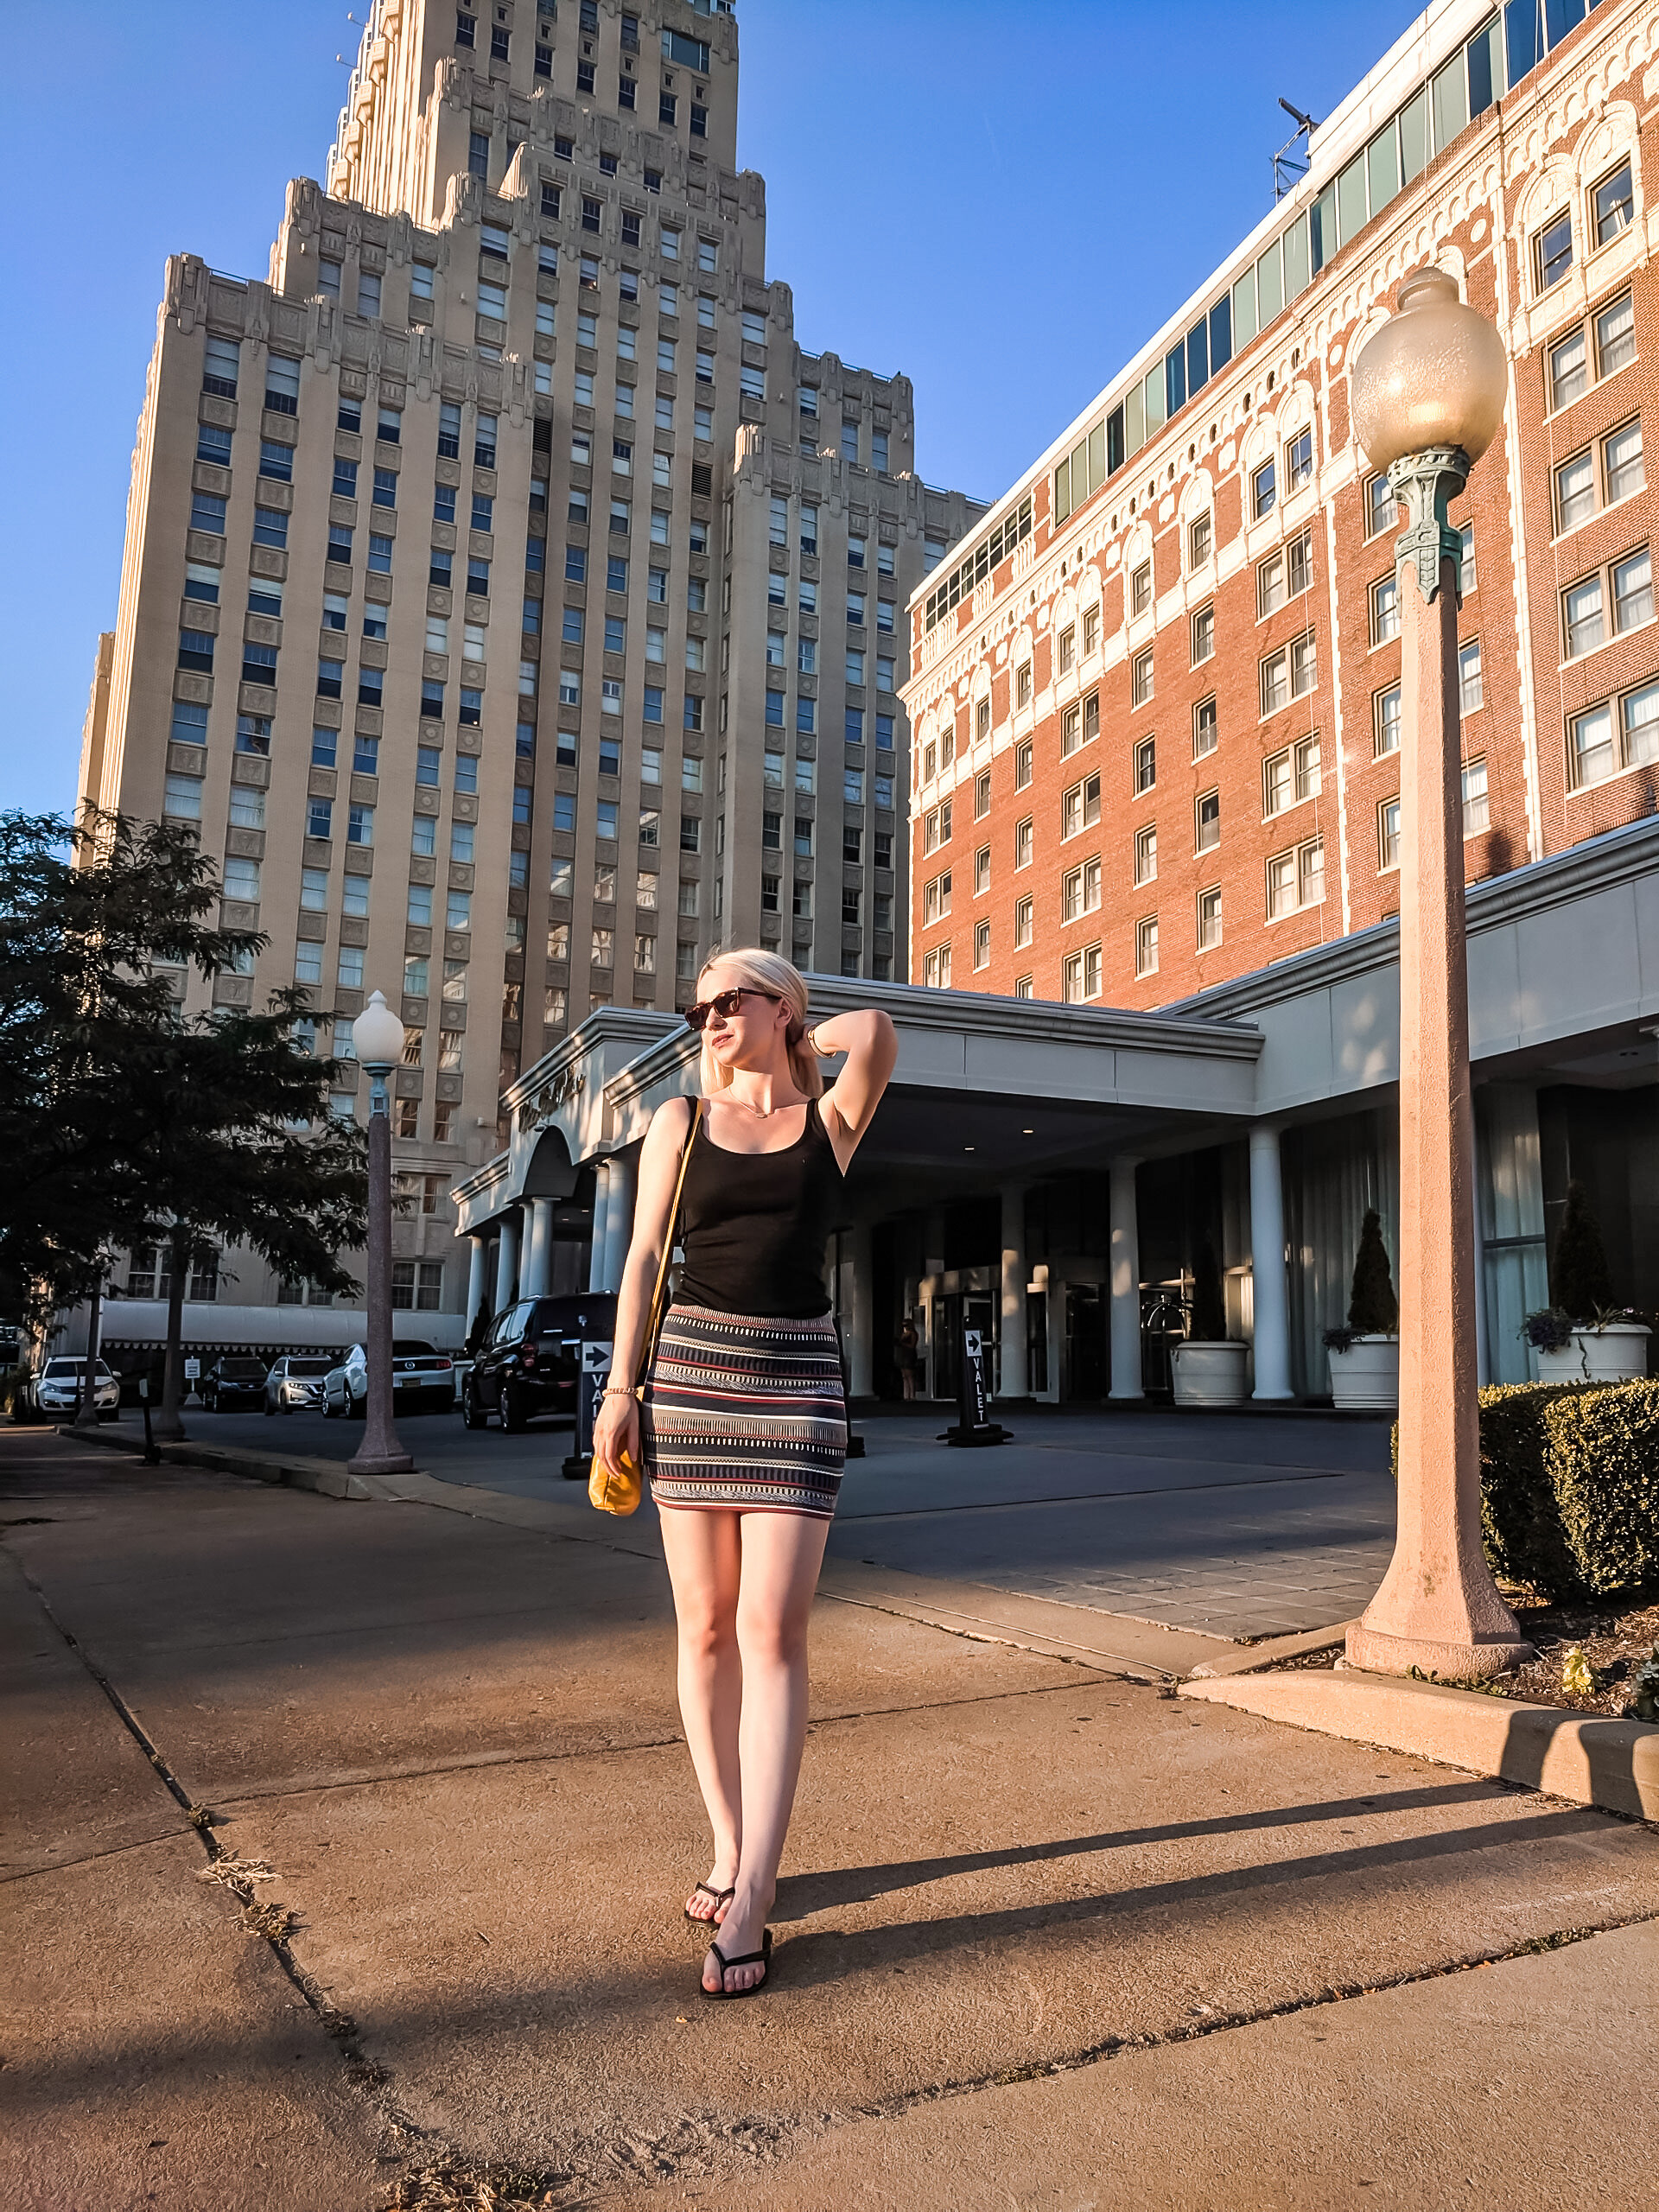 St. Louis Weekend Travel Guide | The Chase Park Plaza Hotel in St. Louis - Royal Sonesta 